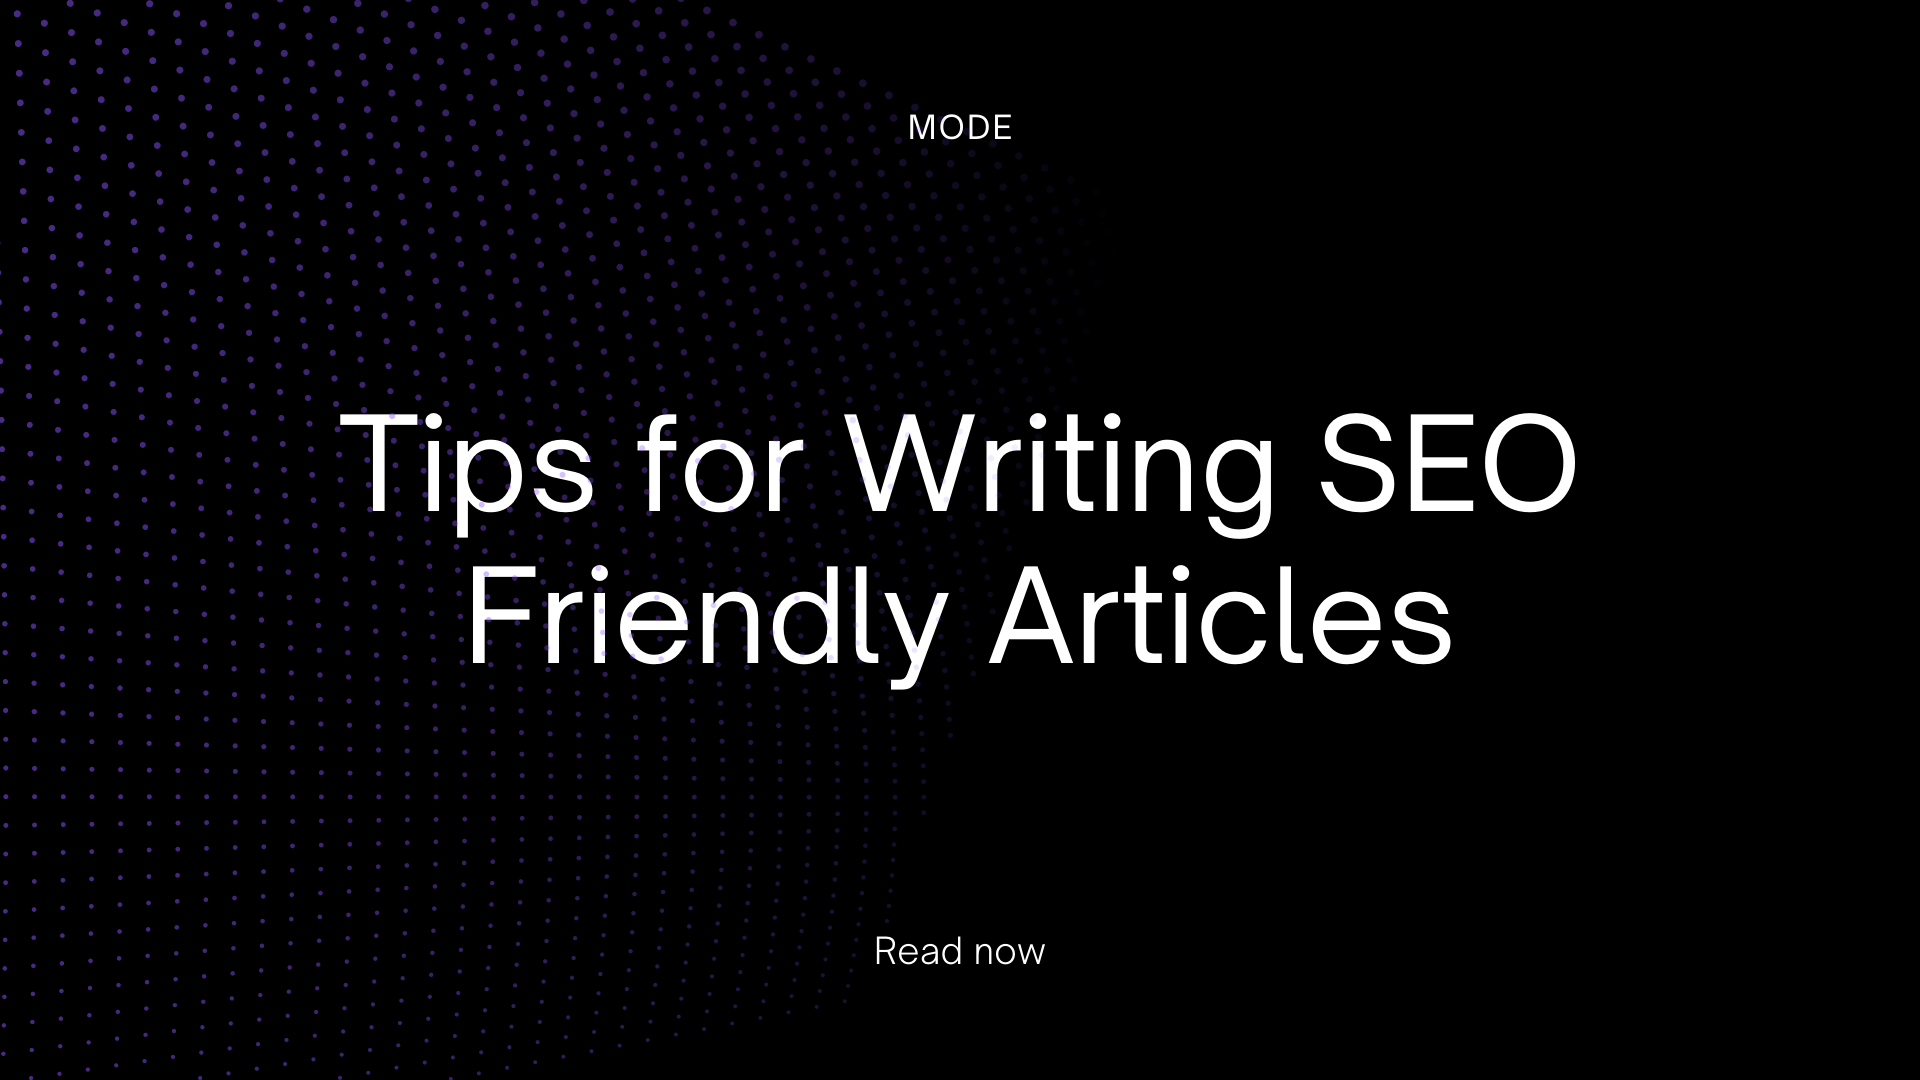 Tips for Writing SEO Friendly Articles